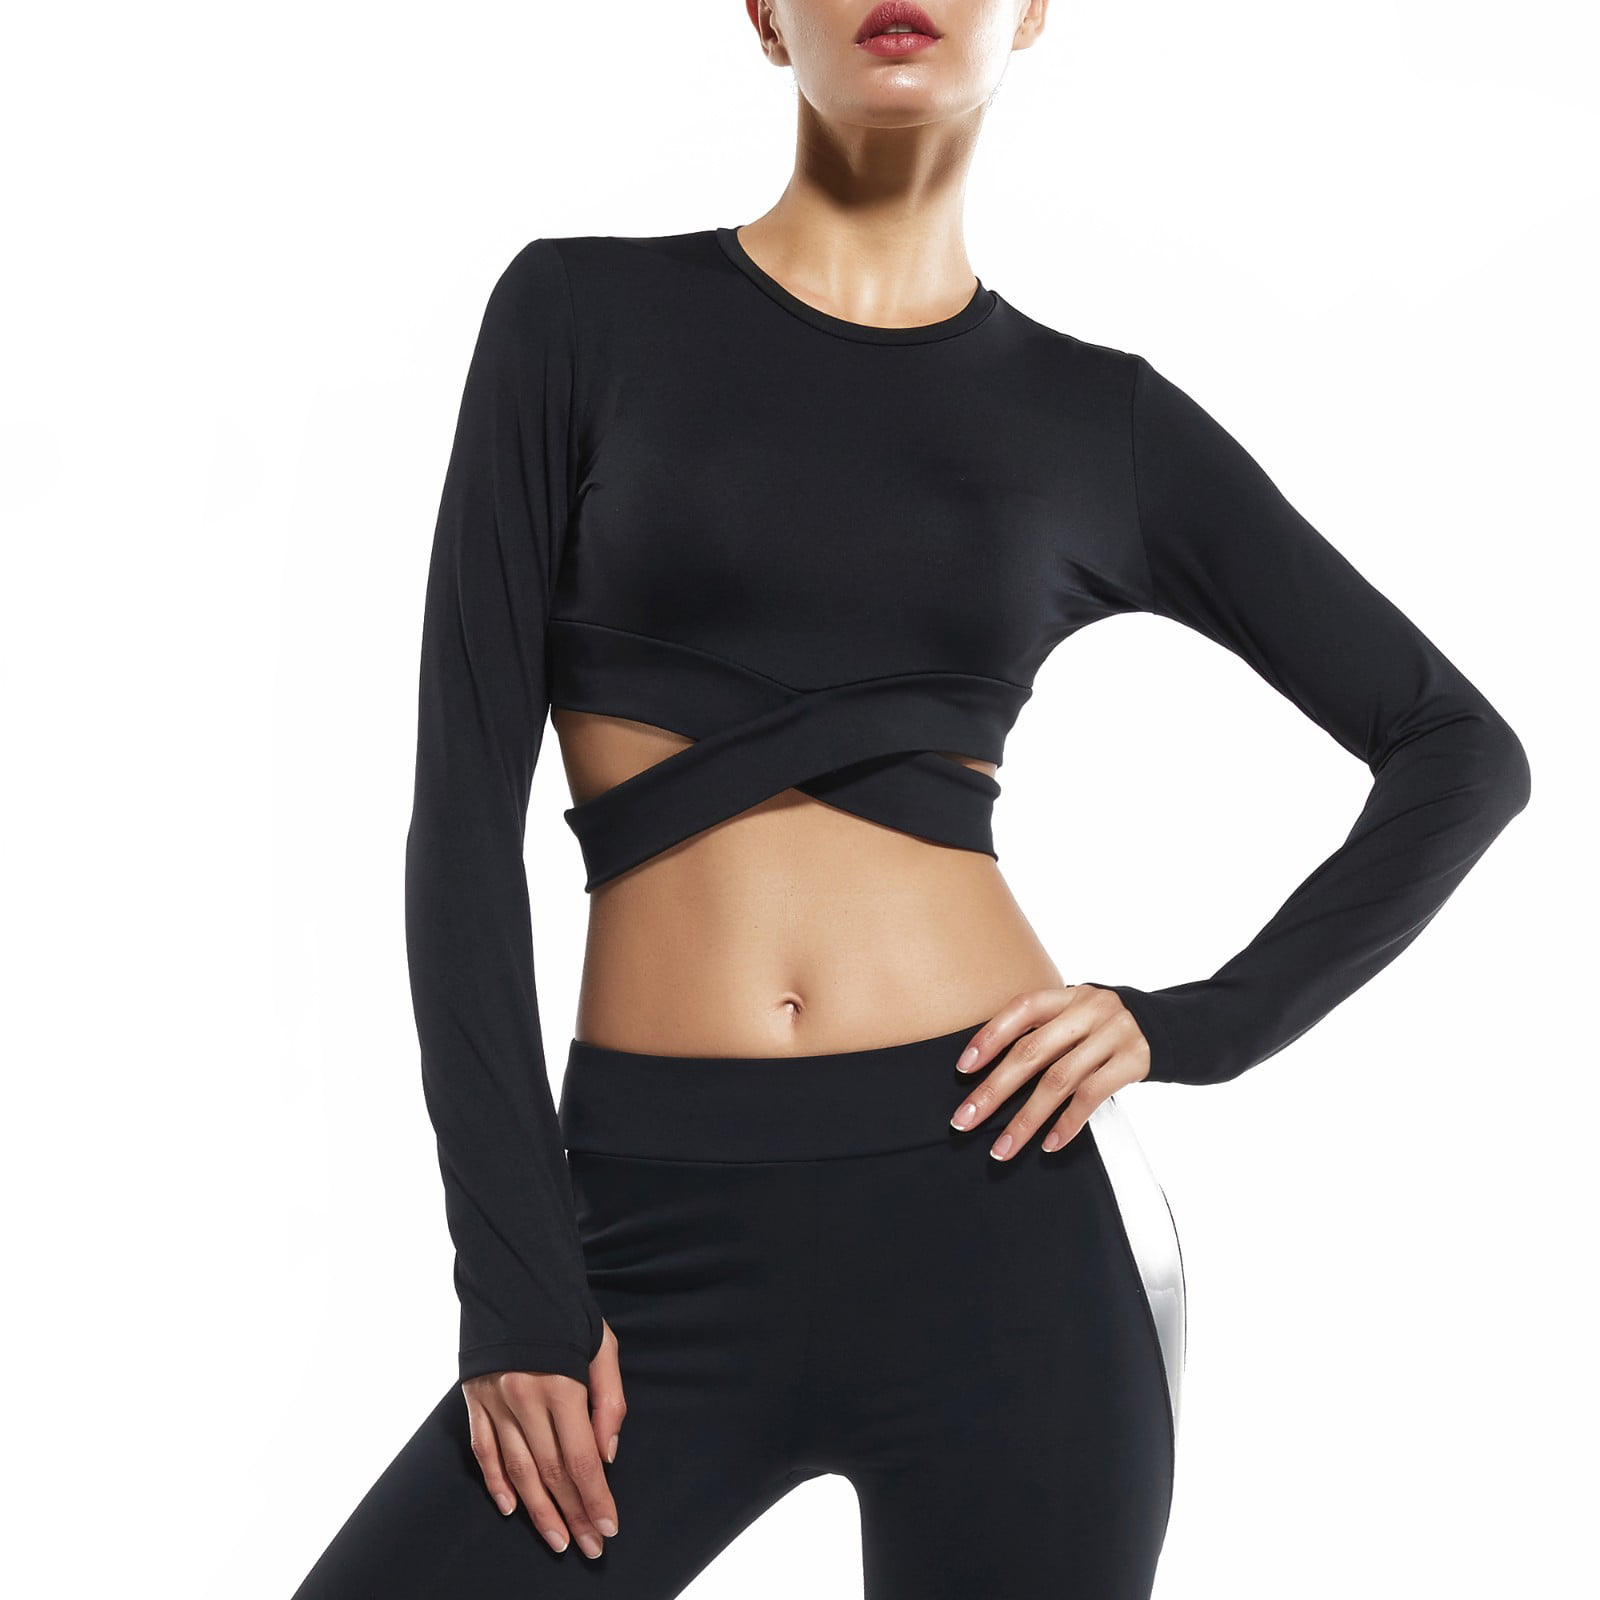 Women's 2 Pack Crop Top Long Sleeve Athletic Workout Yoga Shirts Cropped Sweatshirts with Thumb Hole